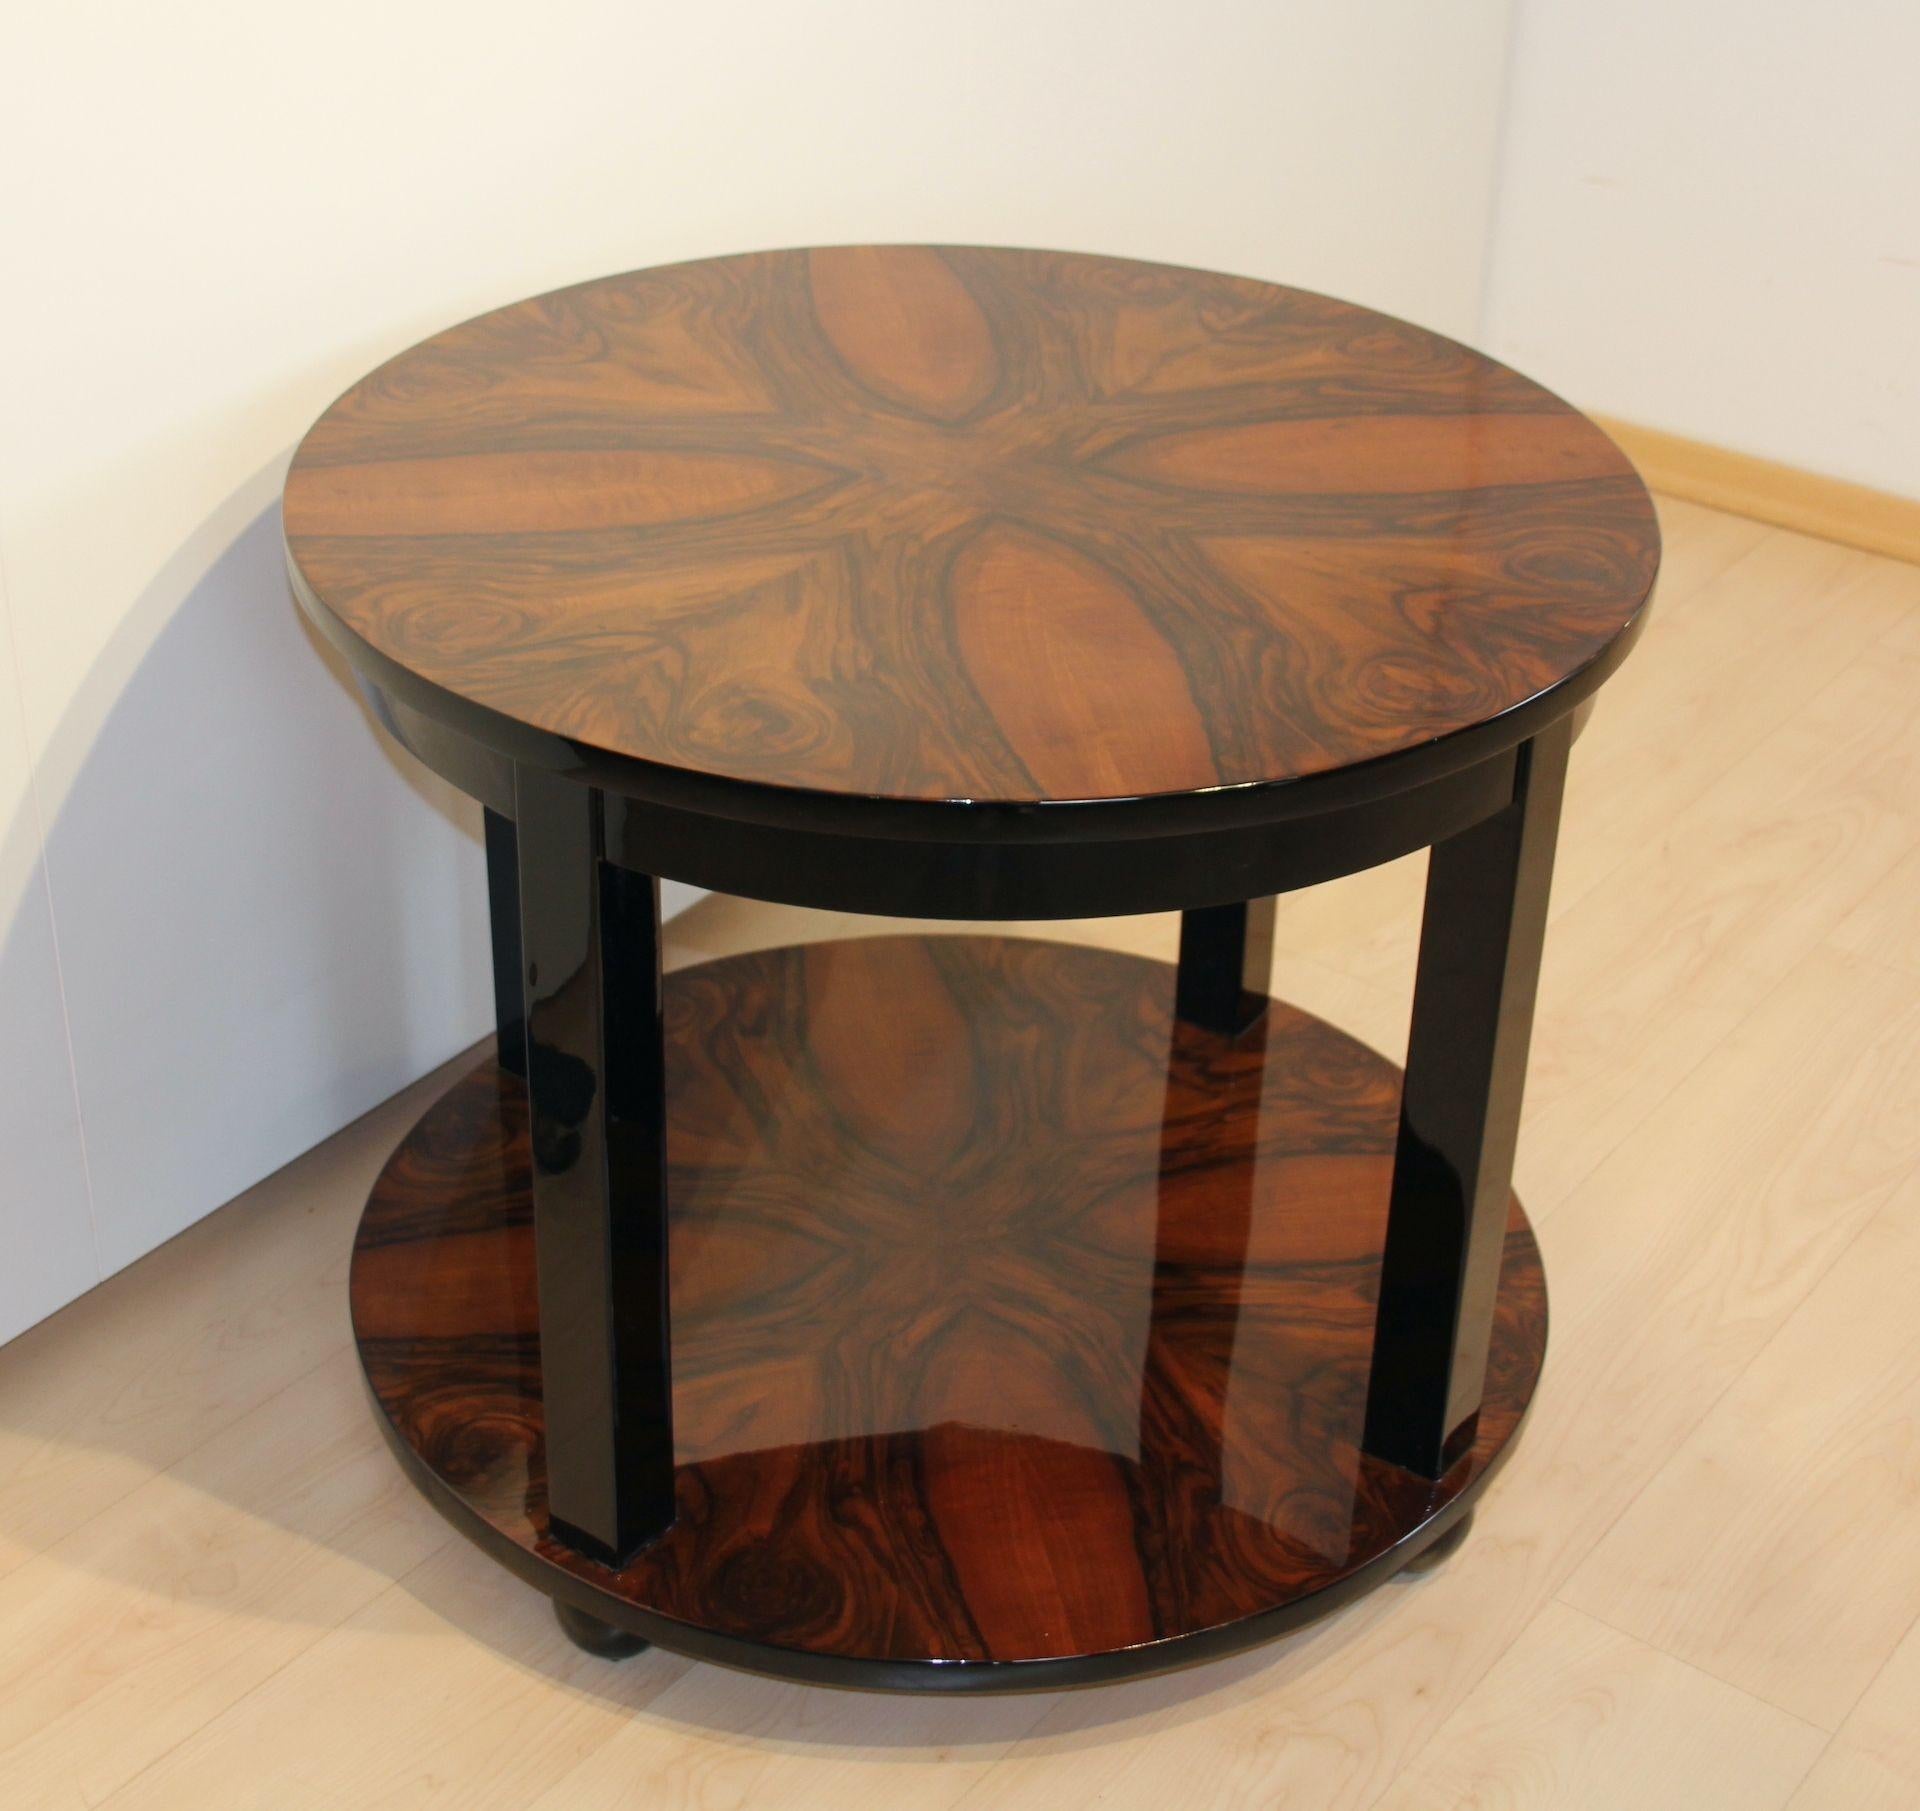 Large, round Art Deco side, sofa or coffee table from France about 1930.
 
Walnut veneered and high gloss lacquered. Black lacquered edges, feet and intermediate bars.
 
Dimensions: H 65.5 cm x Ø 80 cm.